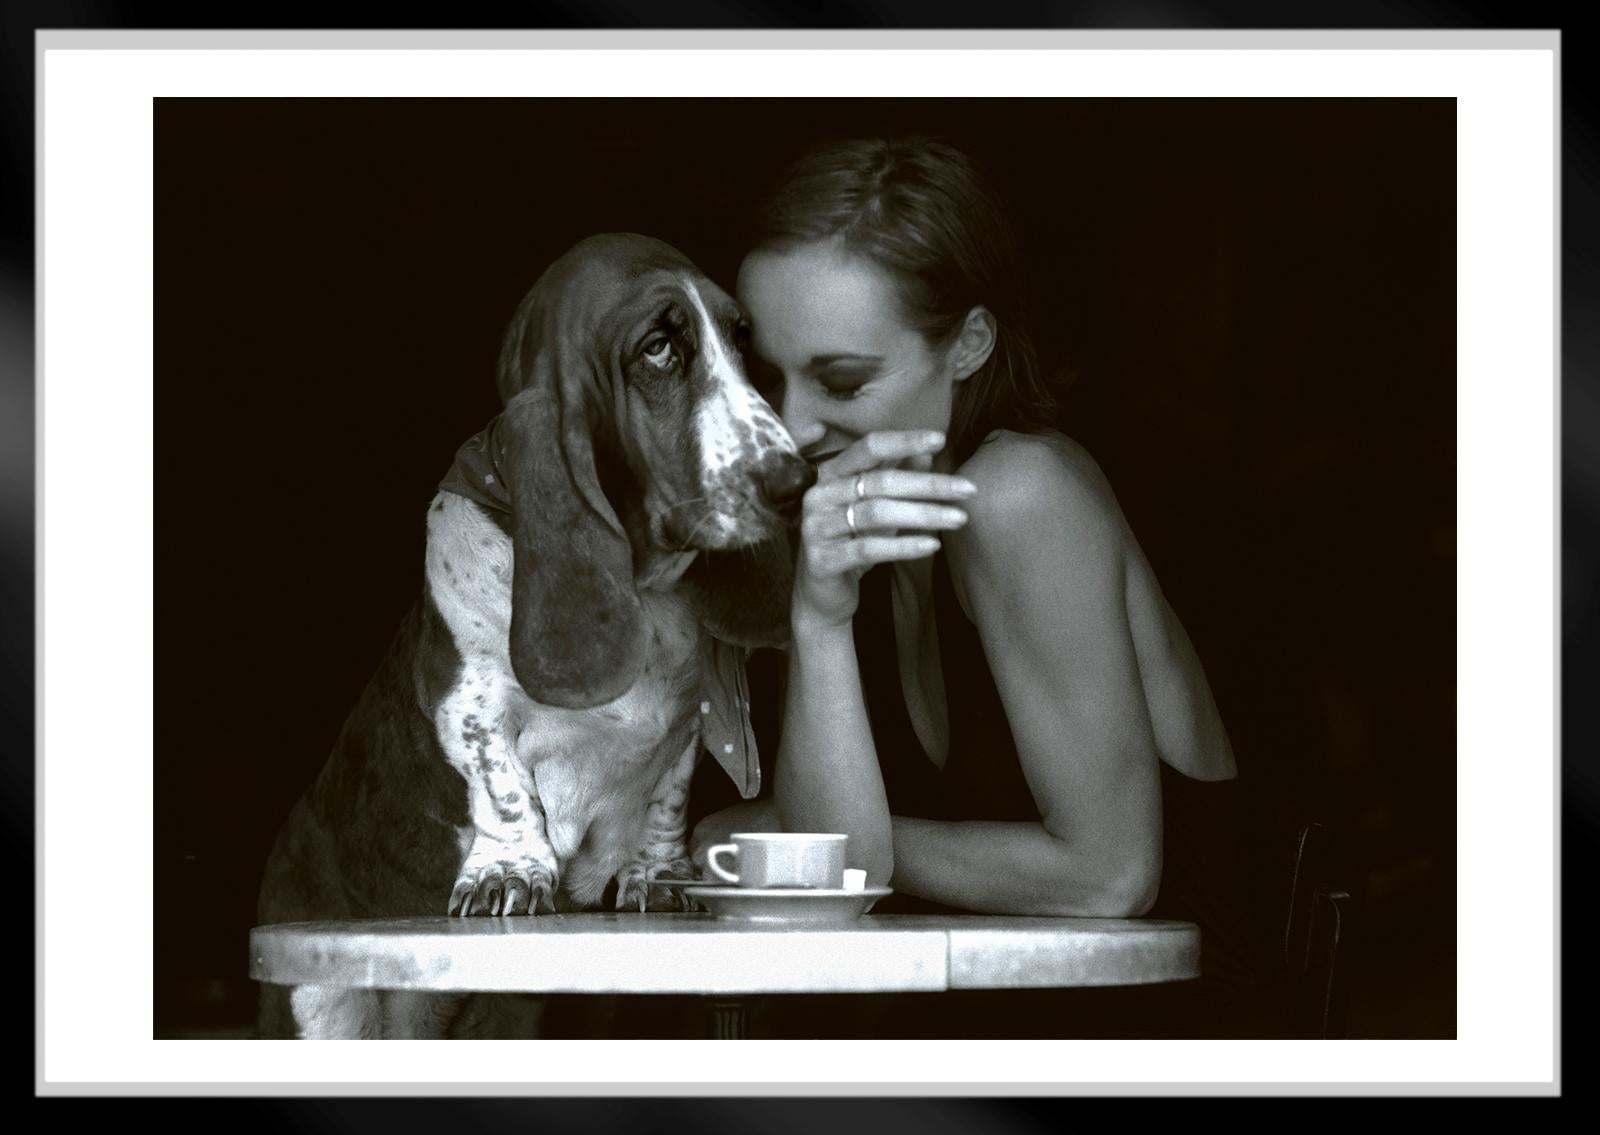  Banya  - Signed limited edition archival pigment print, 1998   - Edition of 5   

A Basset Hound with her friend in a French café
This image was captured on film. 
The negative was scanned creating a digital file which was then printed on